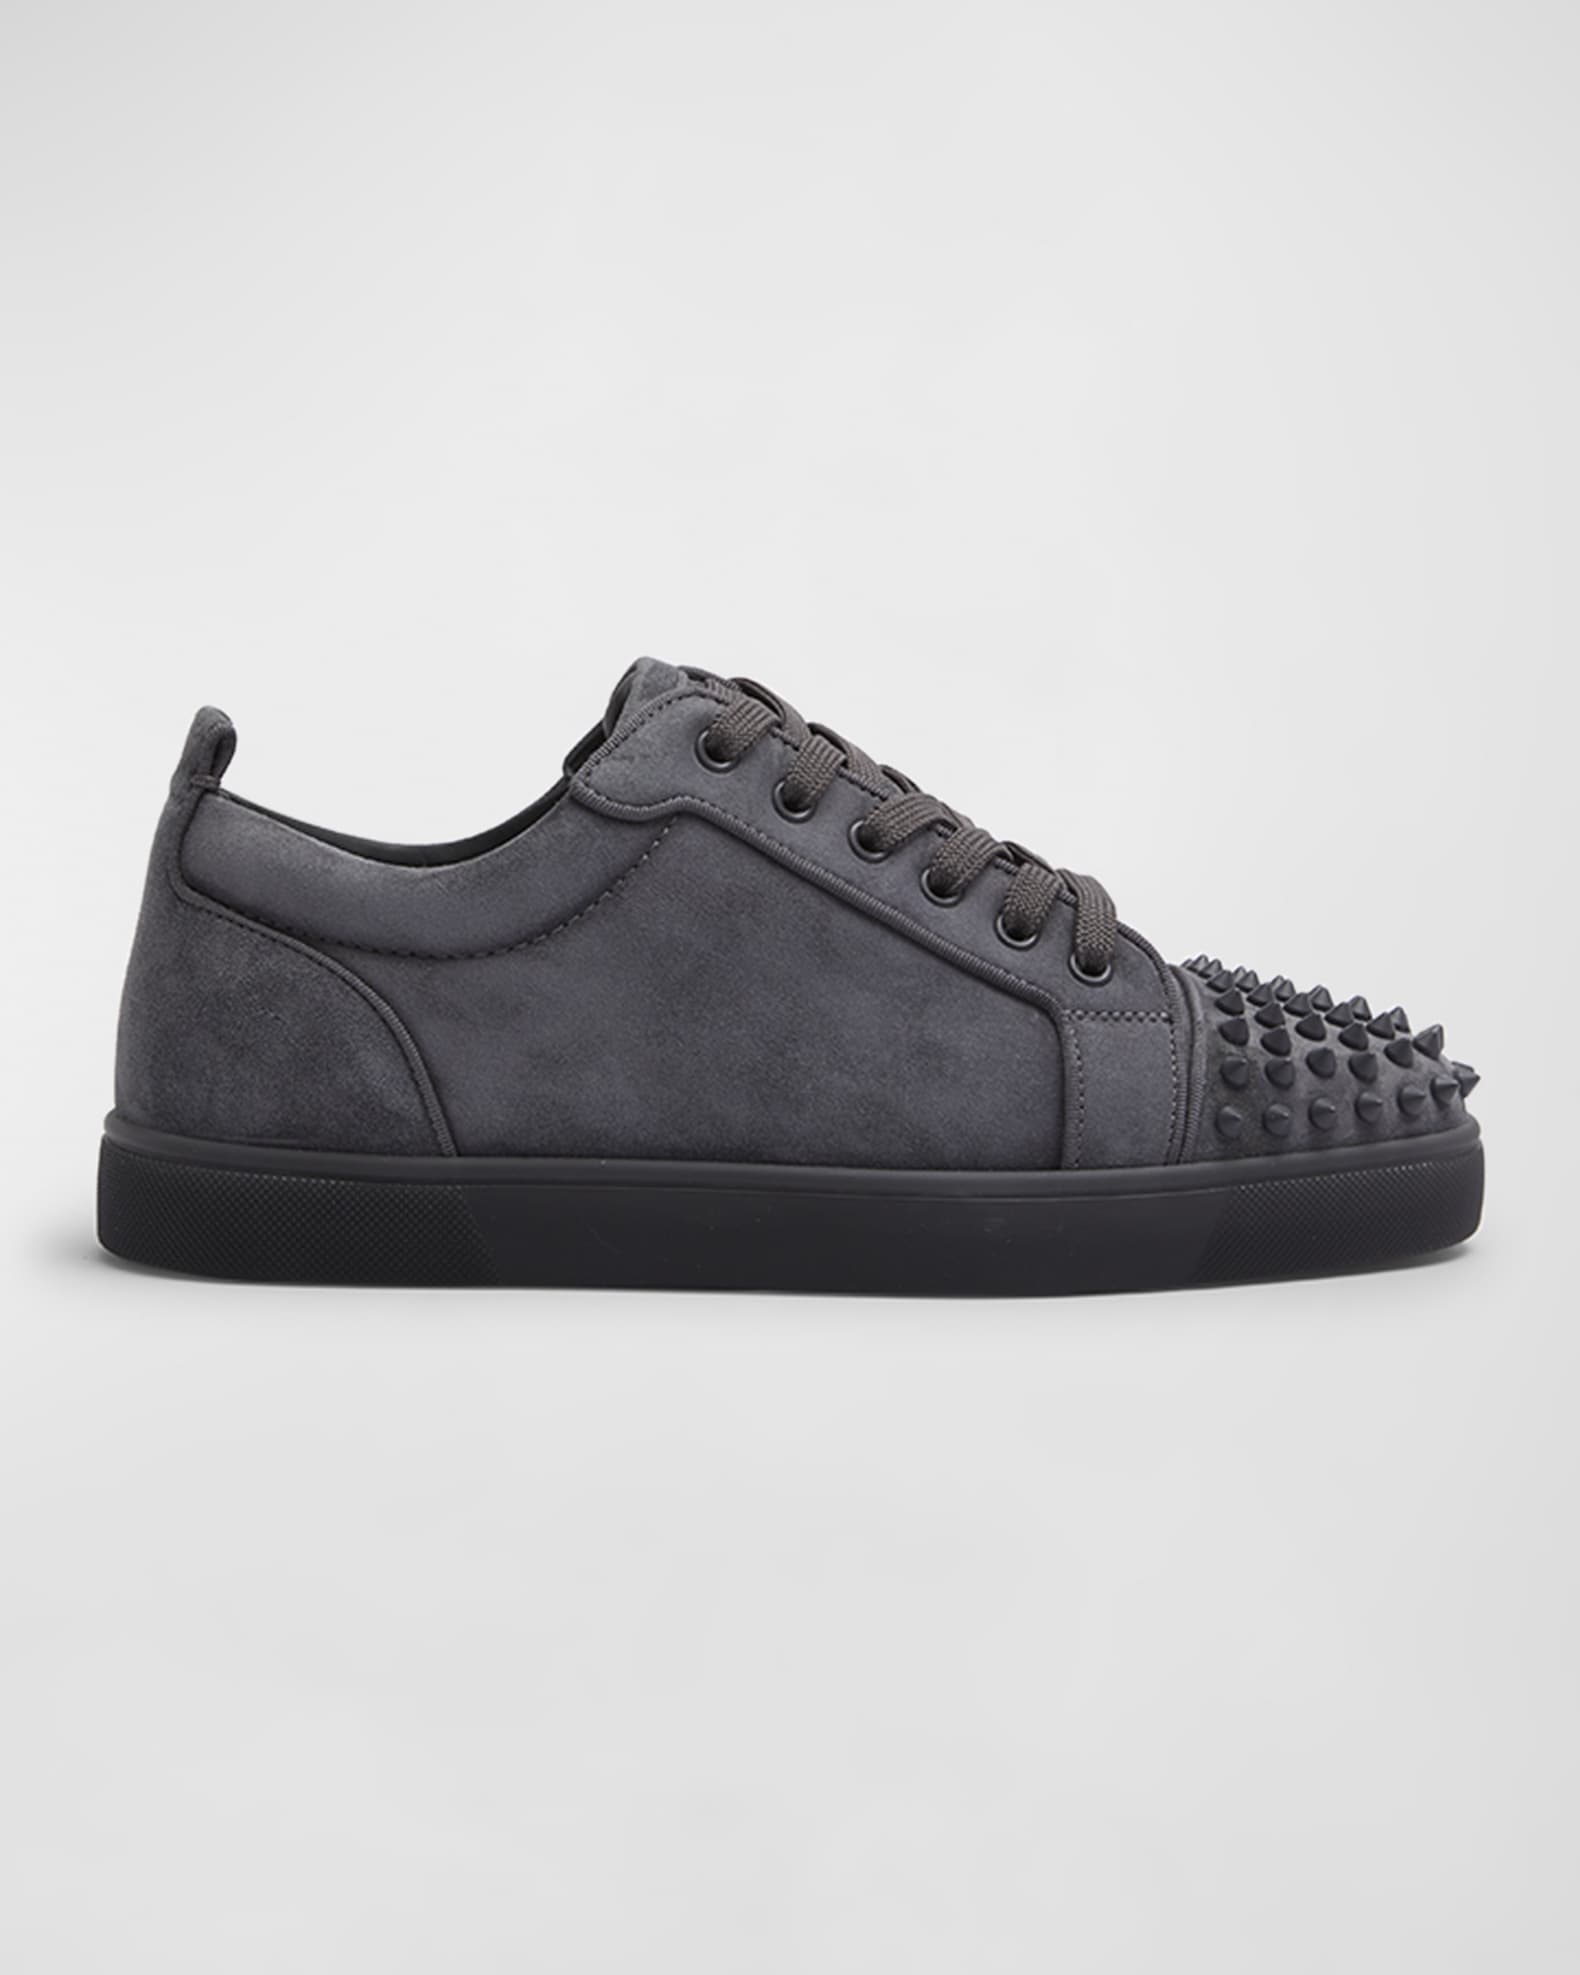 Christian Louboutin Louis Orlato Suede High-top Sneakers In Smoky